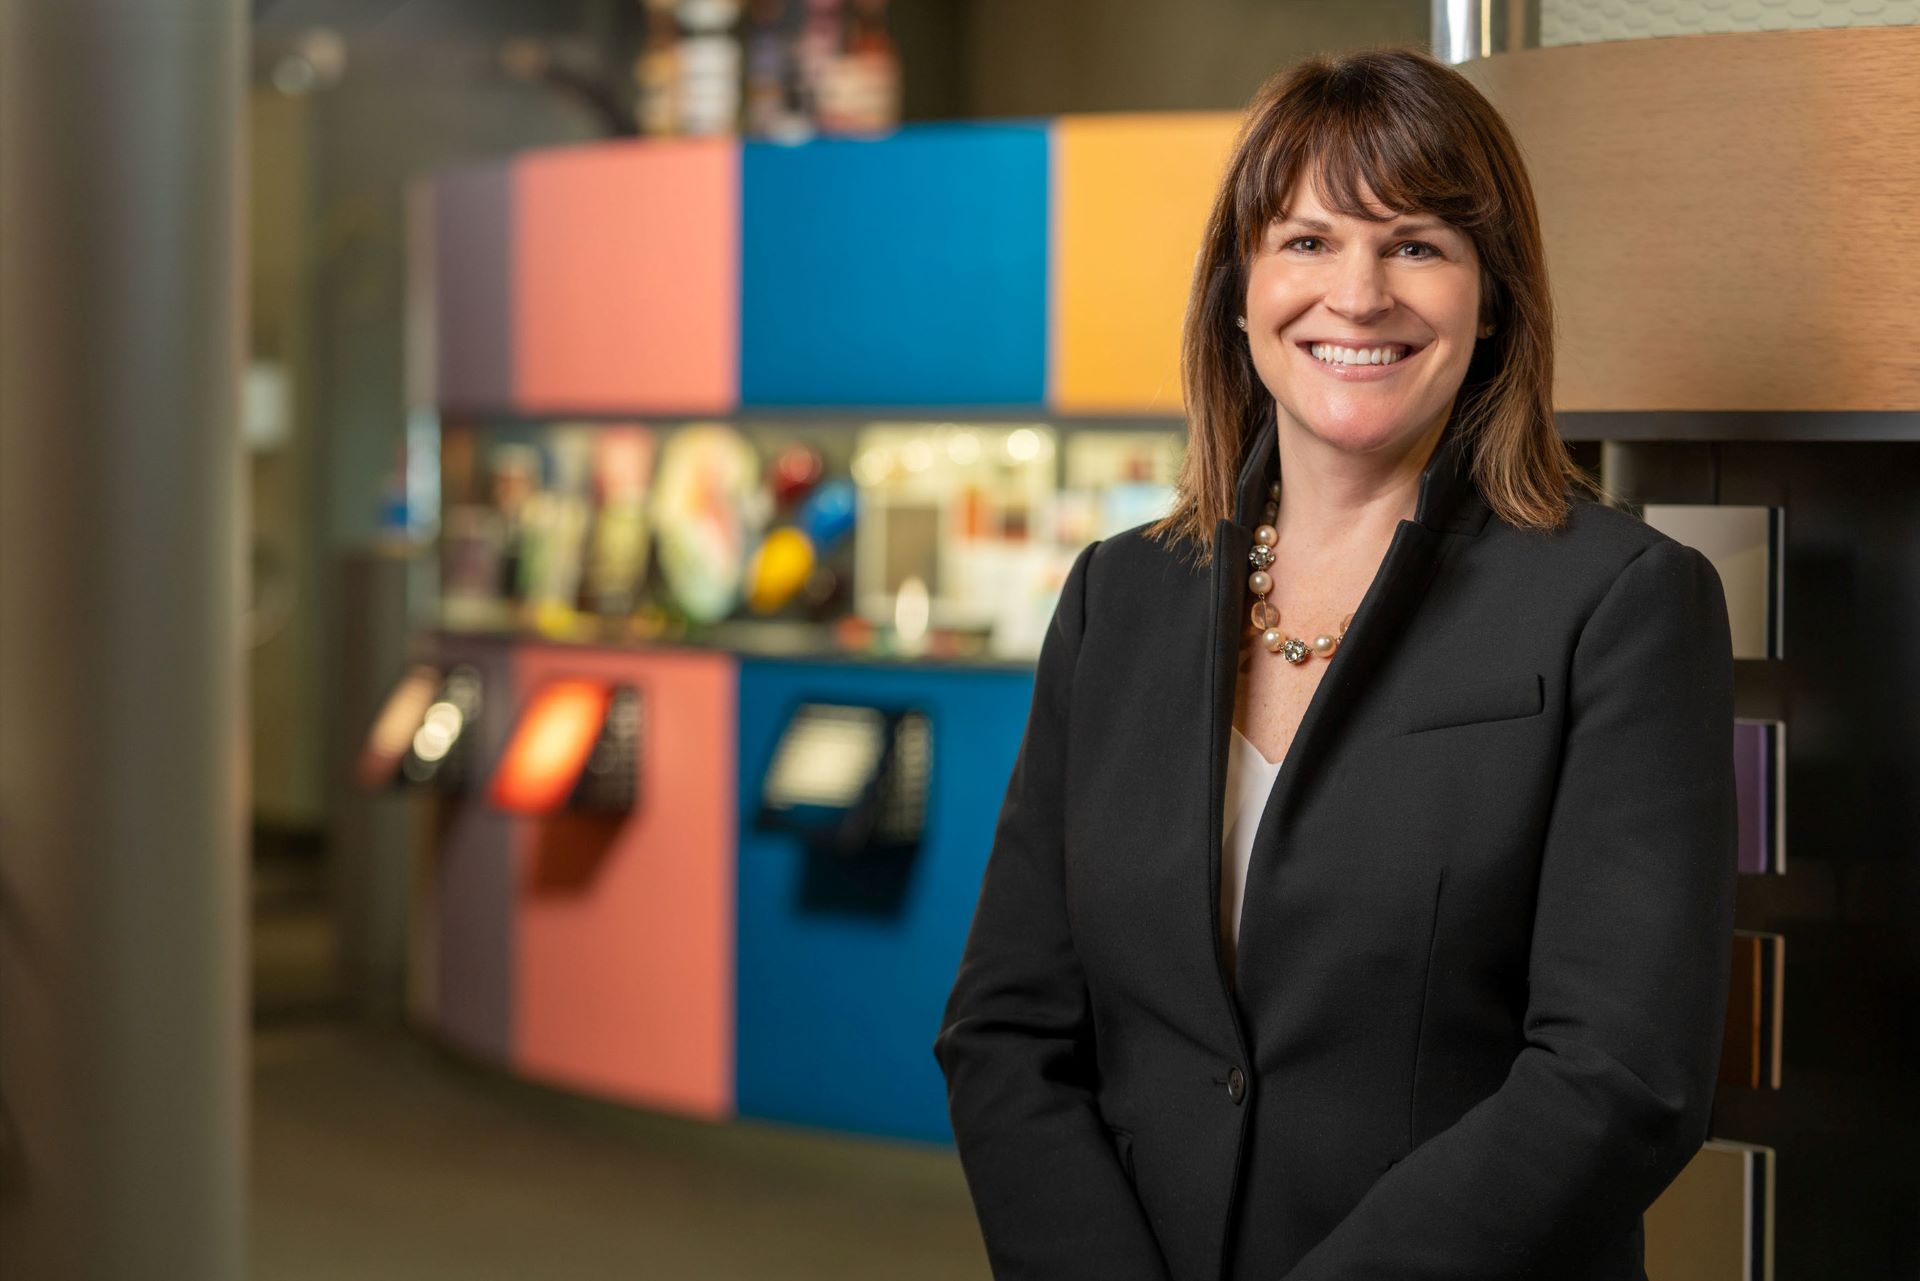 Sherwin-Williams Appoints President/COO, Group Presidents